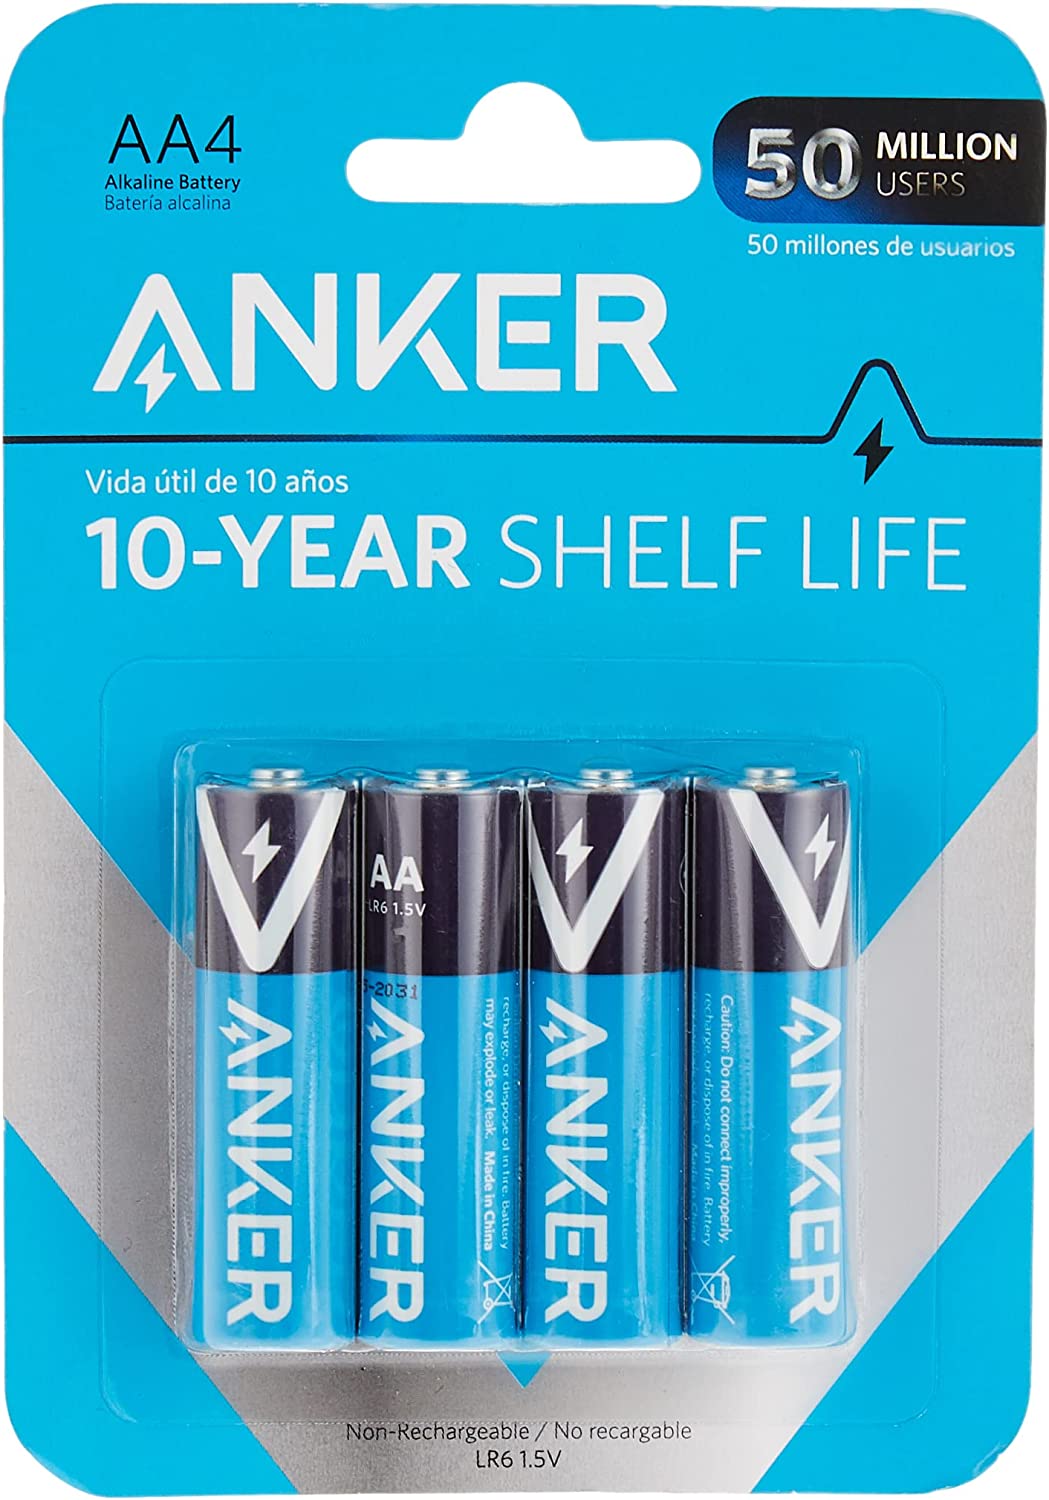 Anker Alkaline AA Batteries (4-Pack), Long-Lasting & Leak-Proof with PowerLock Technology, High Capacity Triple A Batteries with Adaptive Power and Superior Safety (Non-Rechargeable)